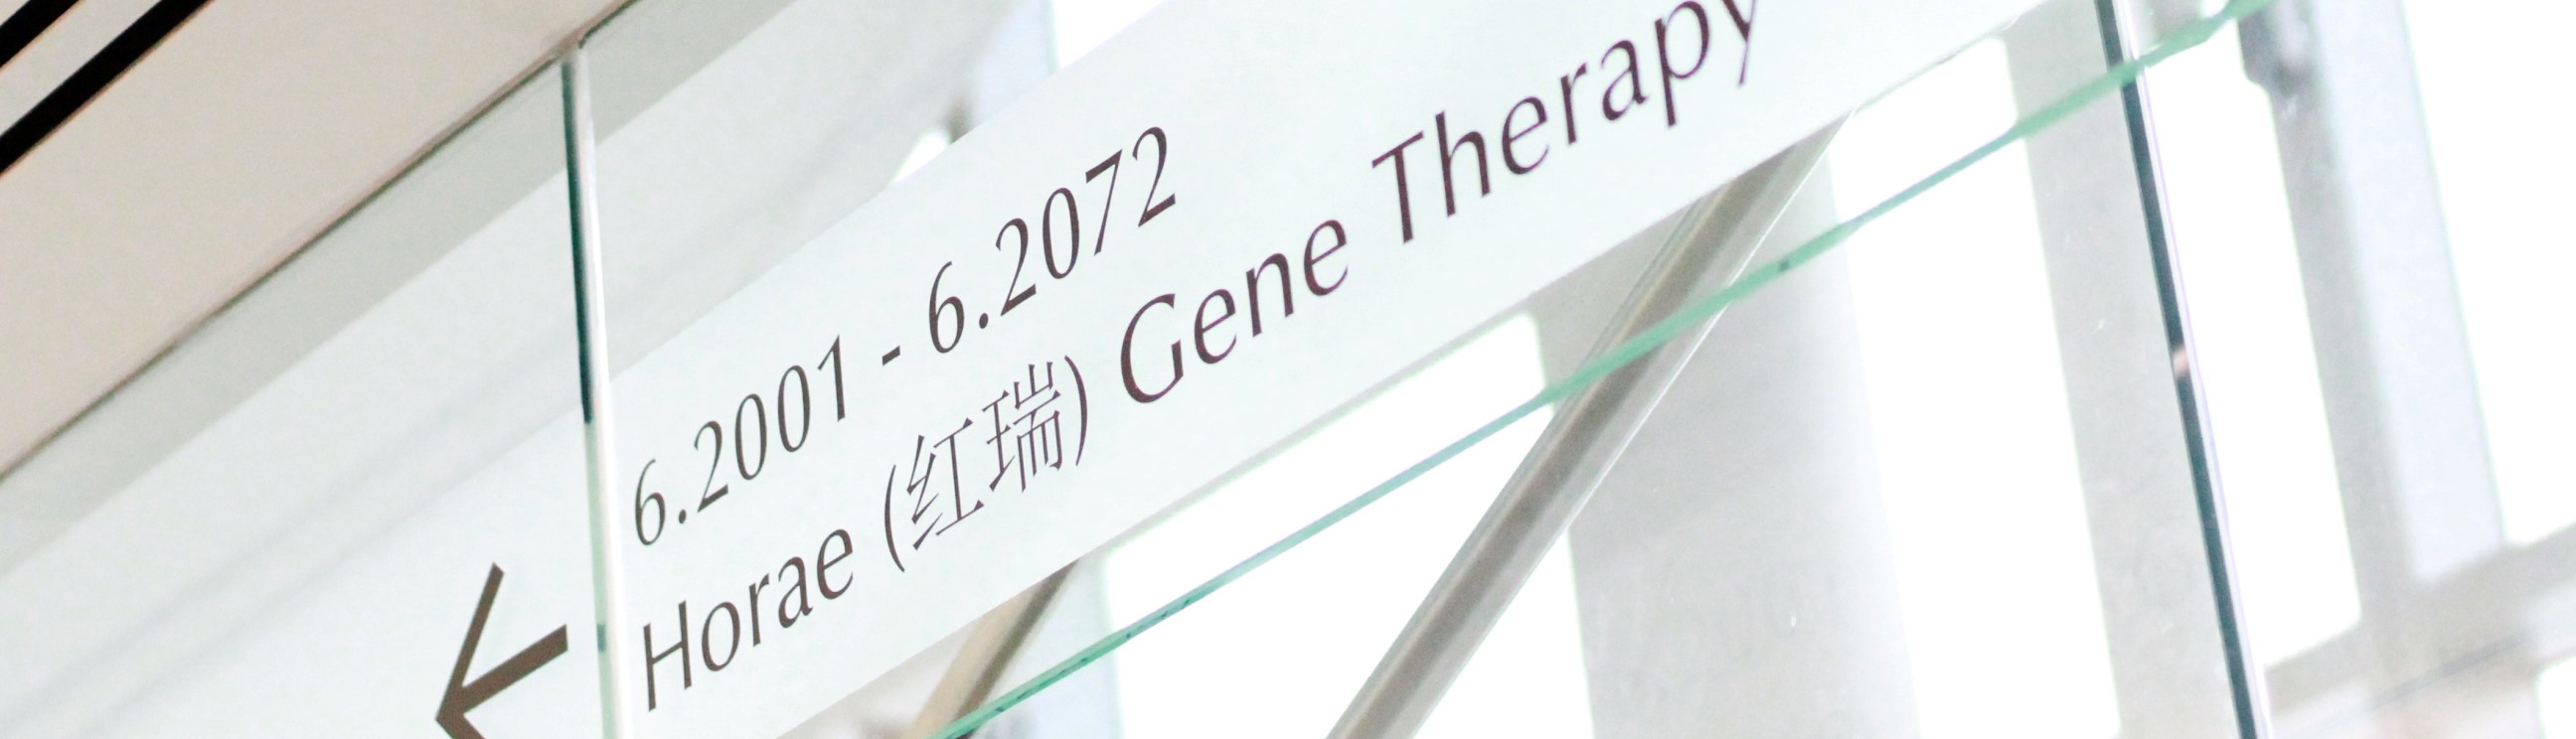 Horae Gene Therapy Center